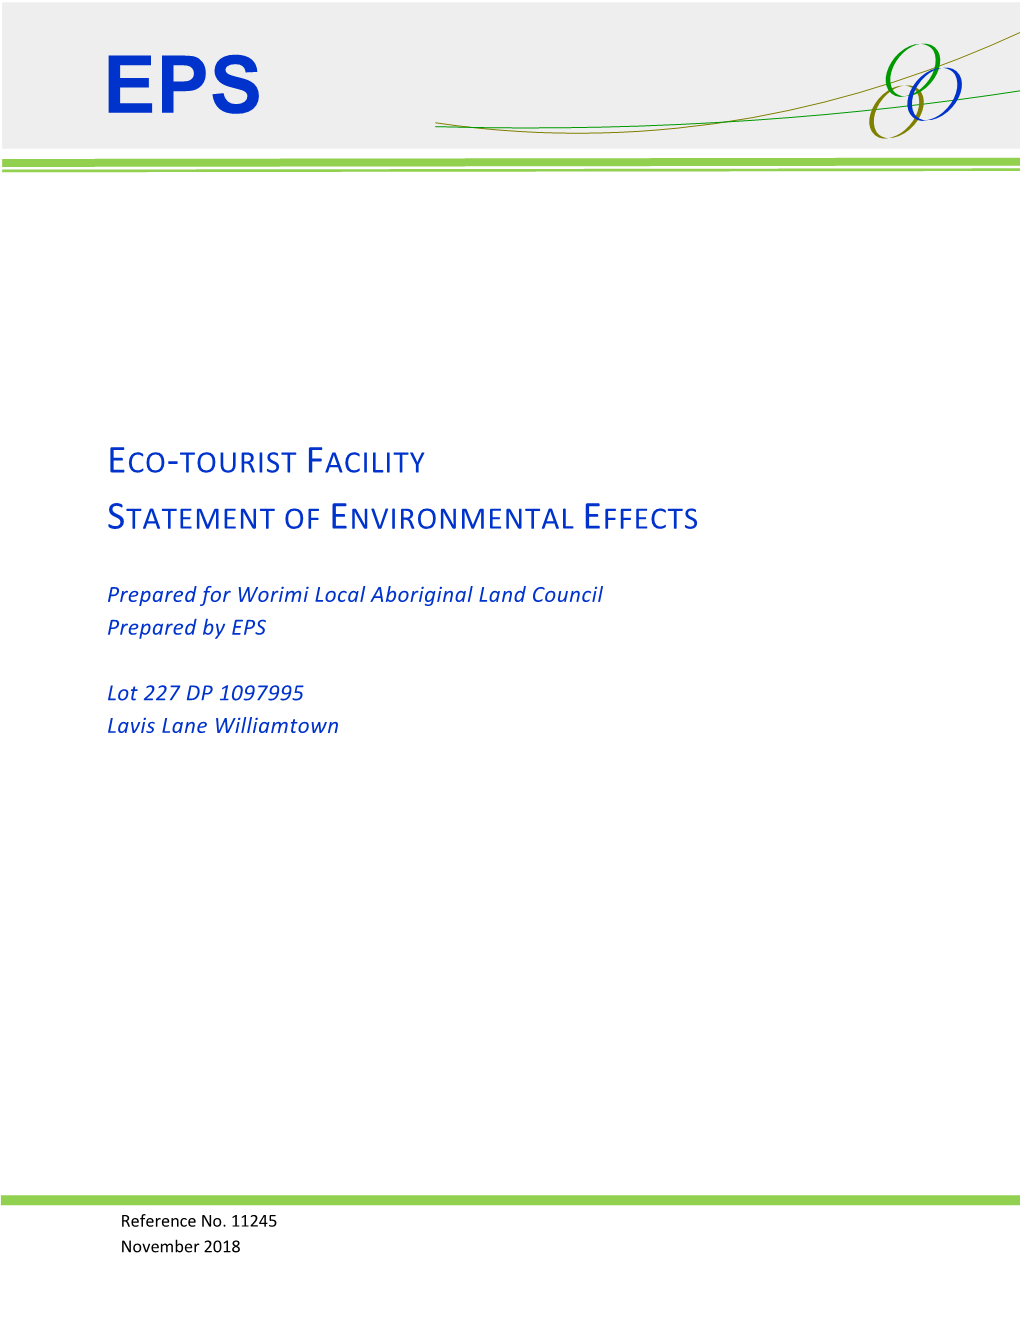 Eco-Tourist Facility Statement of Environmental Effects